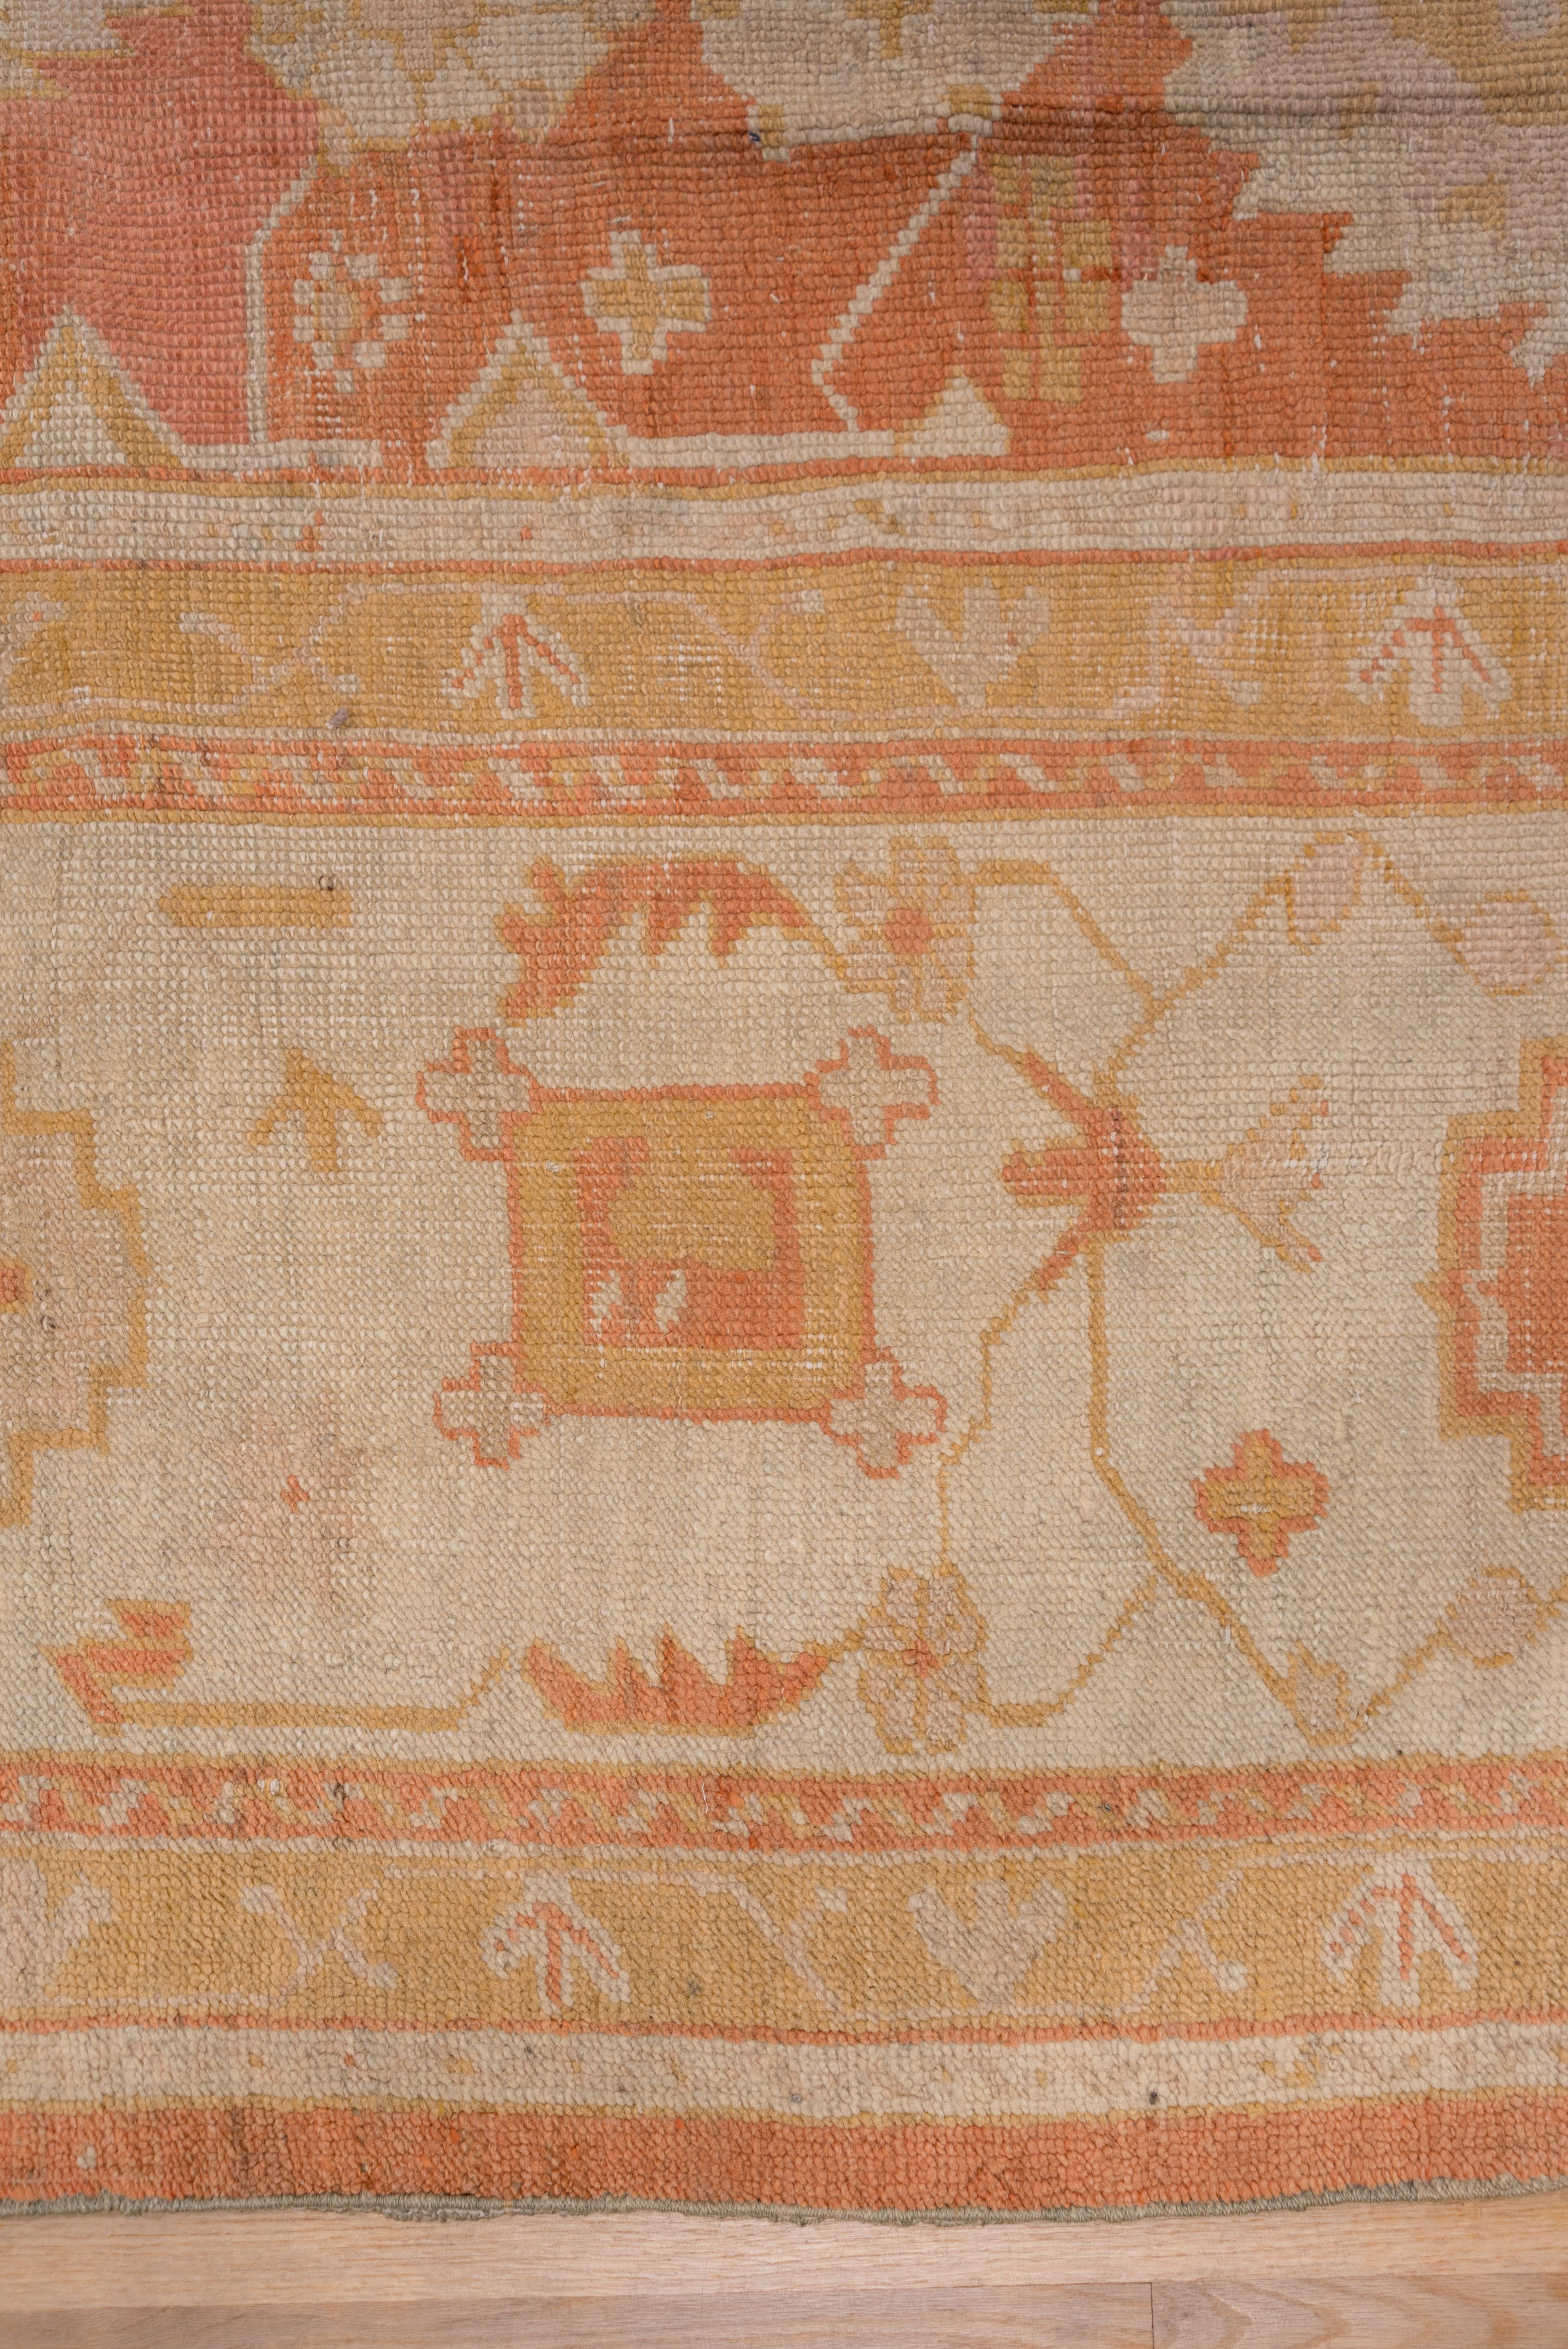 Early 20th Century Antique Turkish Oushak Rug, Orange All-Over Field, Ivory Borders, circa 1900s For Sale